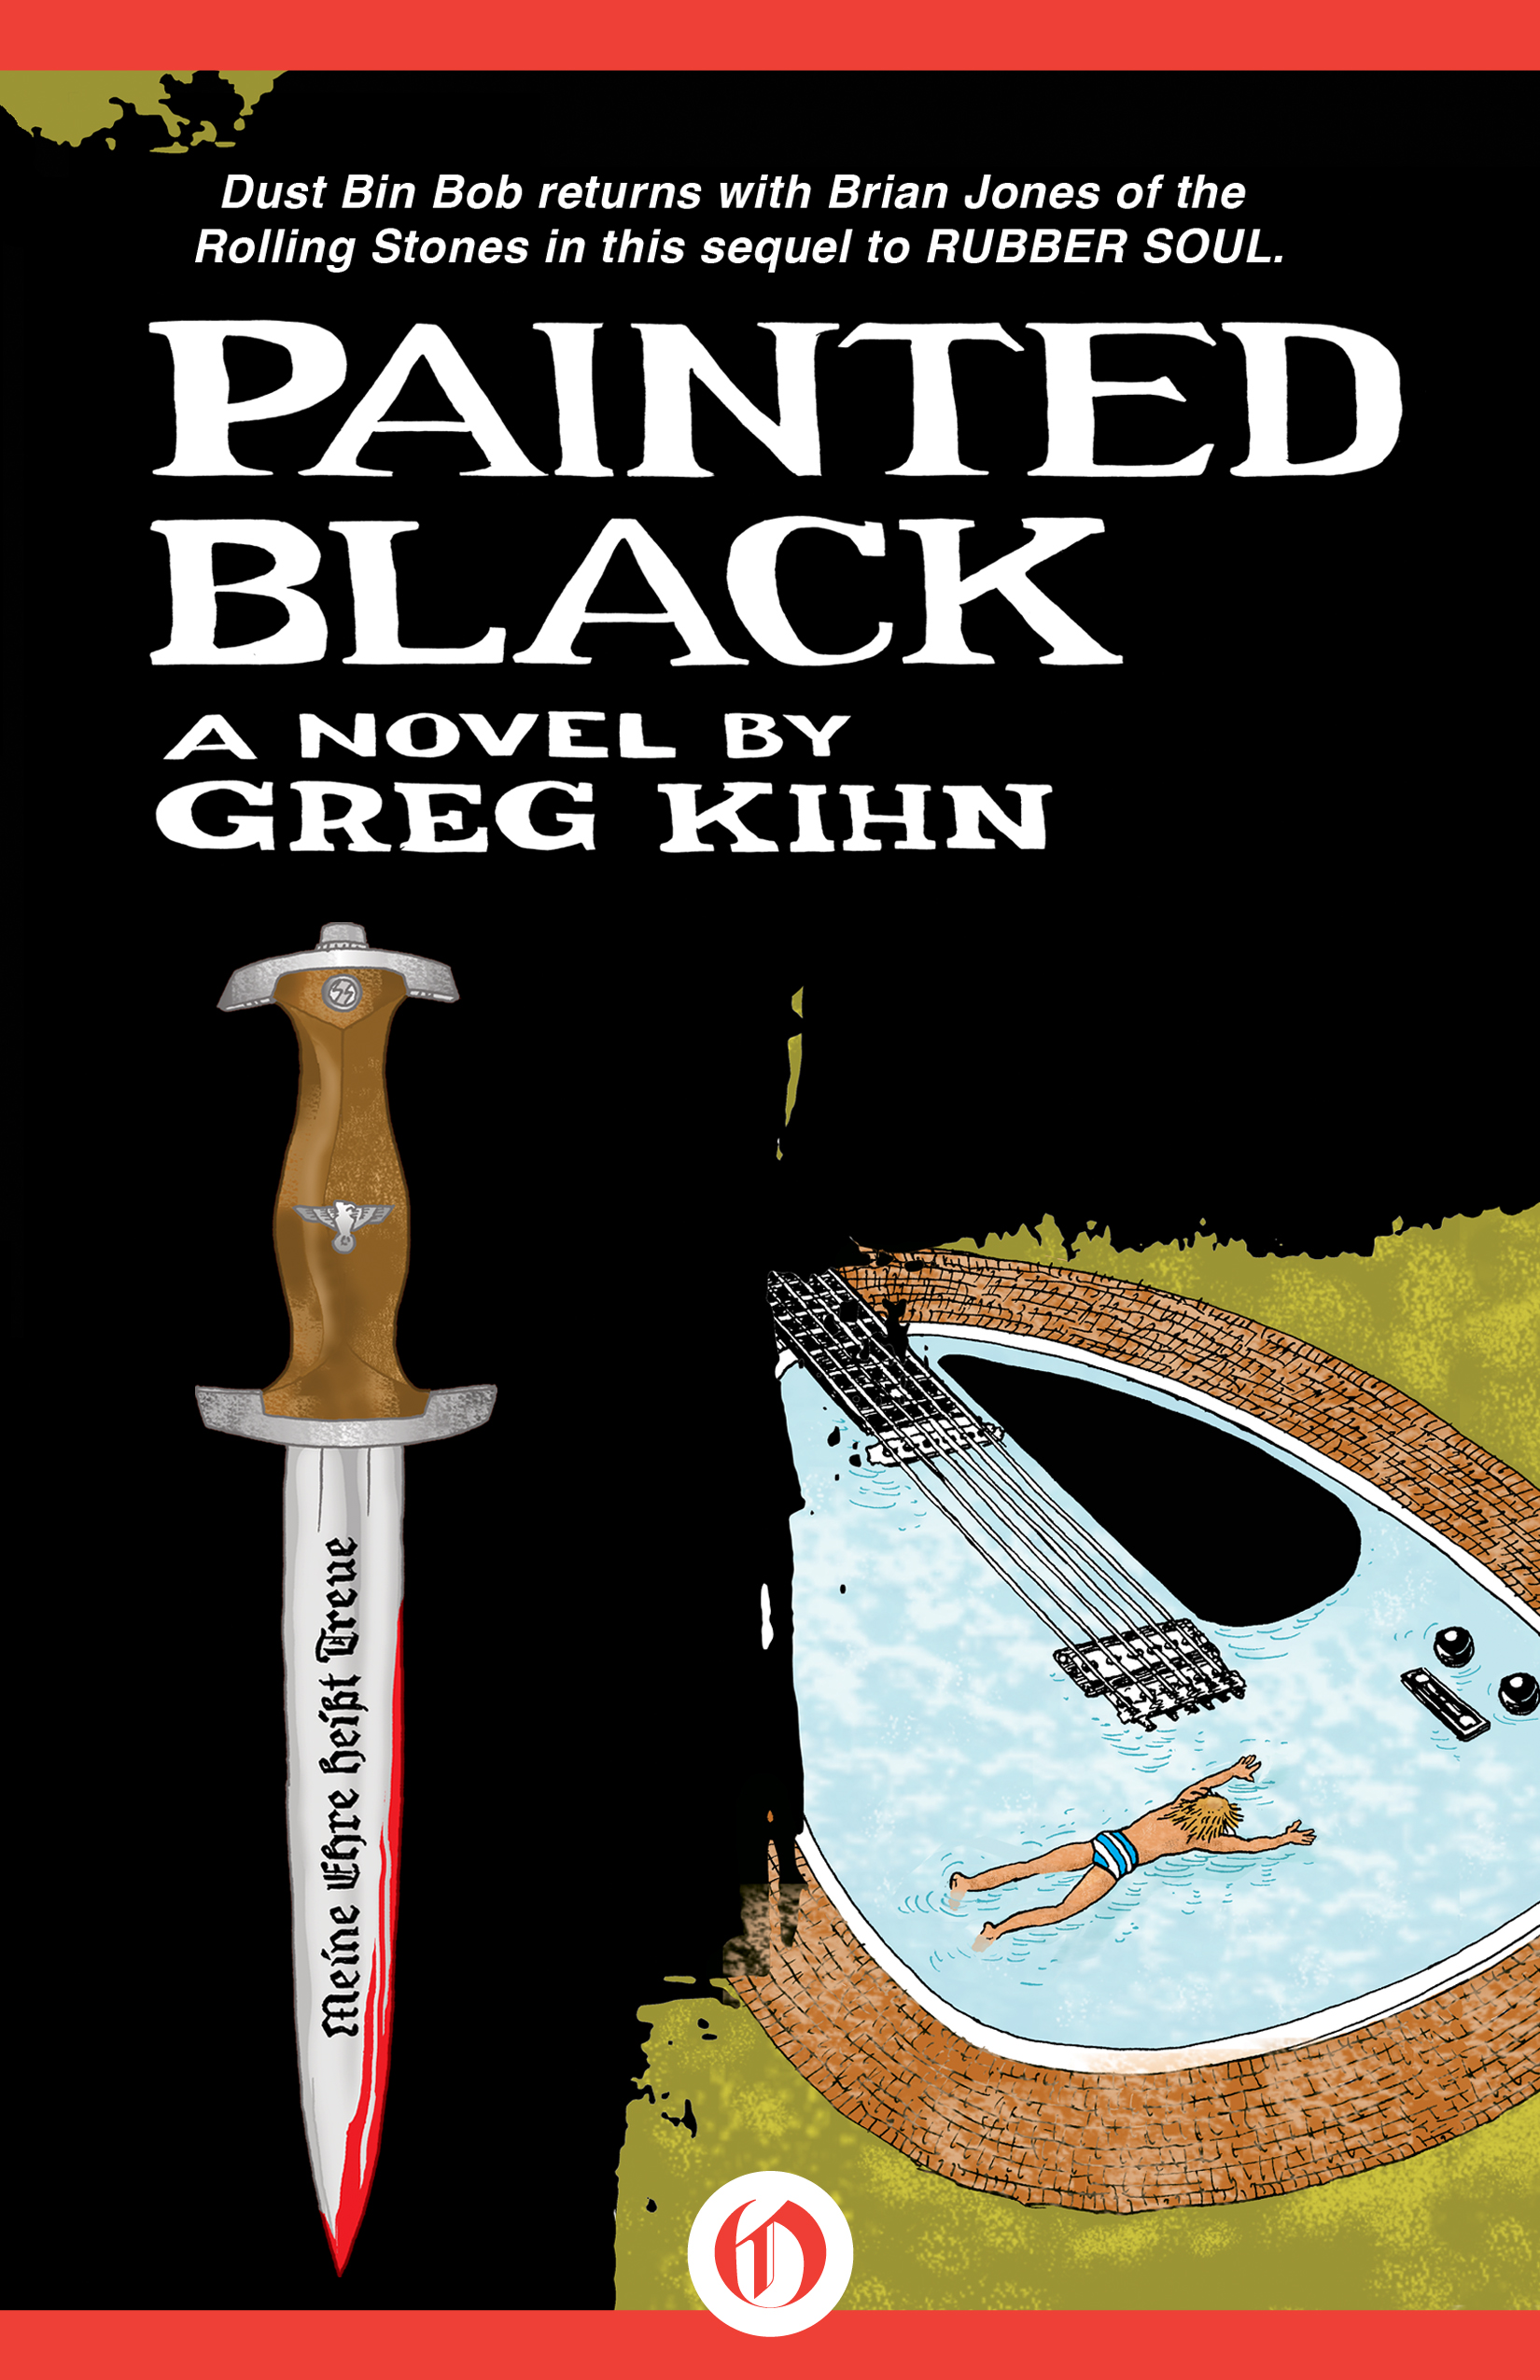 PAINTED BLACK; 2015’s Most Anticipated Rock and Roll Historical Fiction Novel by Author, Rock Star & Radio Personality GREG KIHN